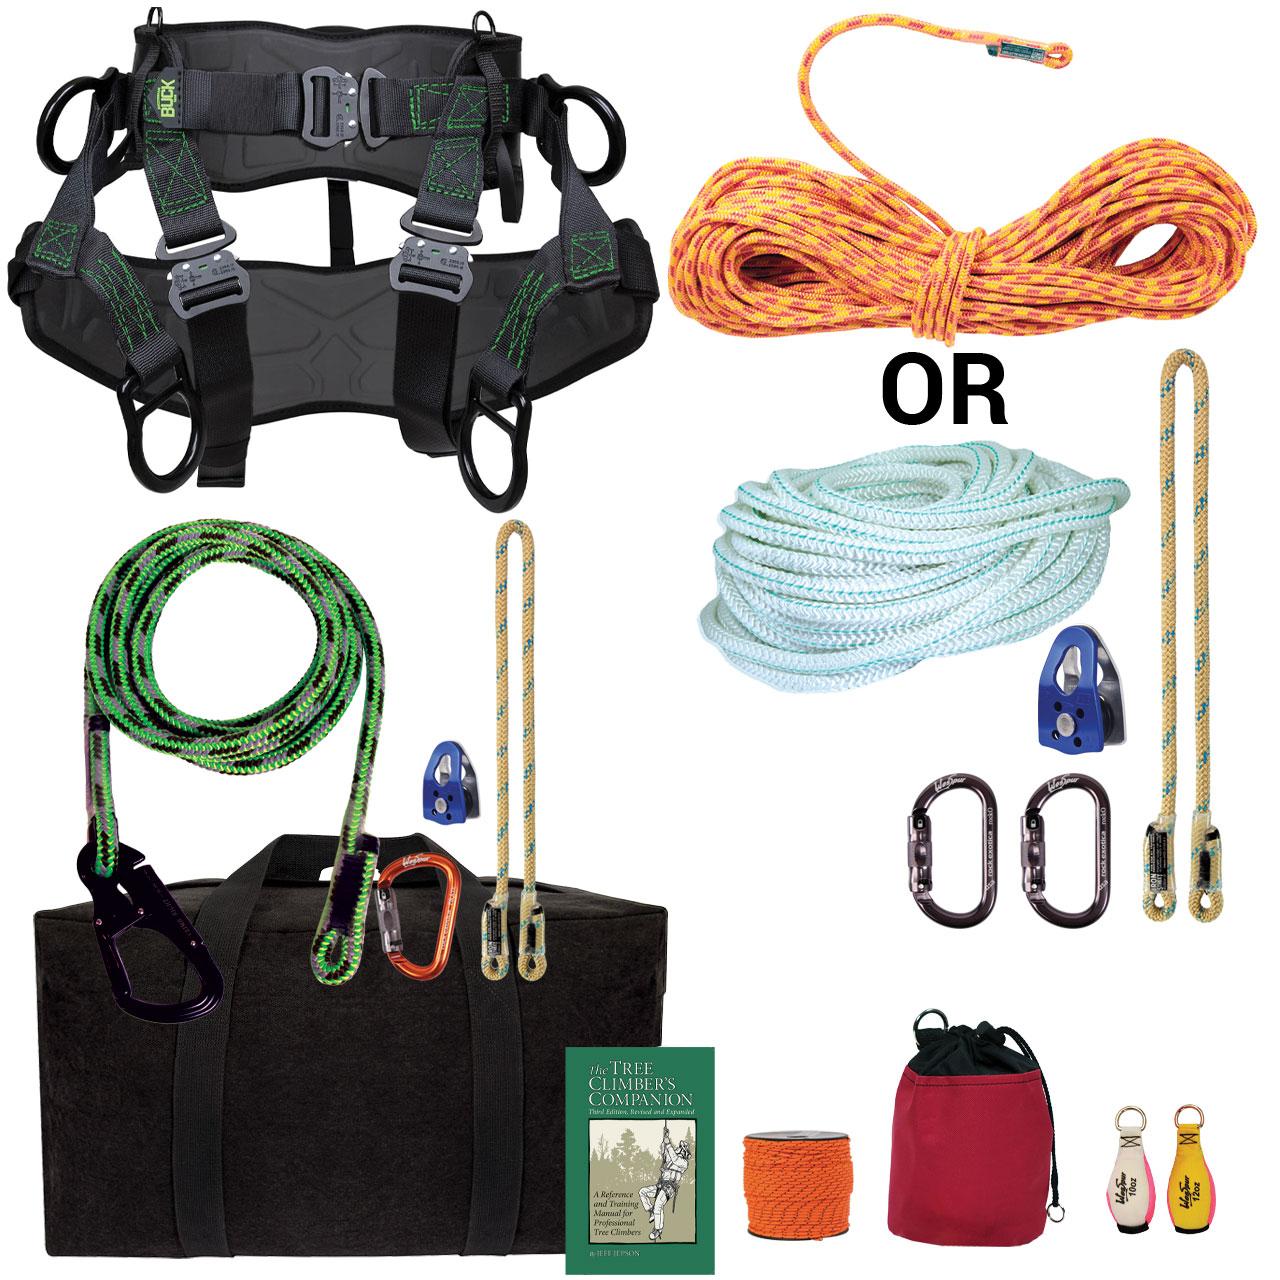 Professional's Moving Rope System (MRS) Tree Climbing Kit